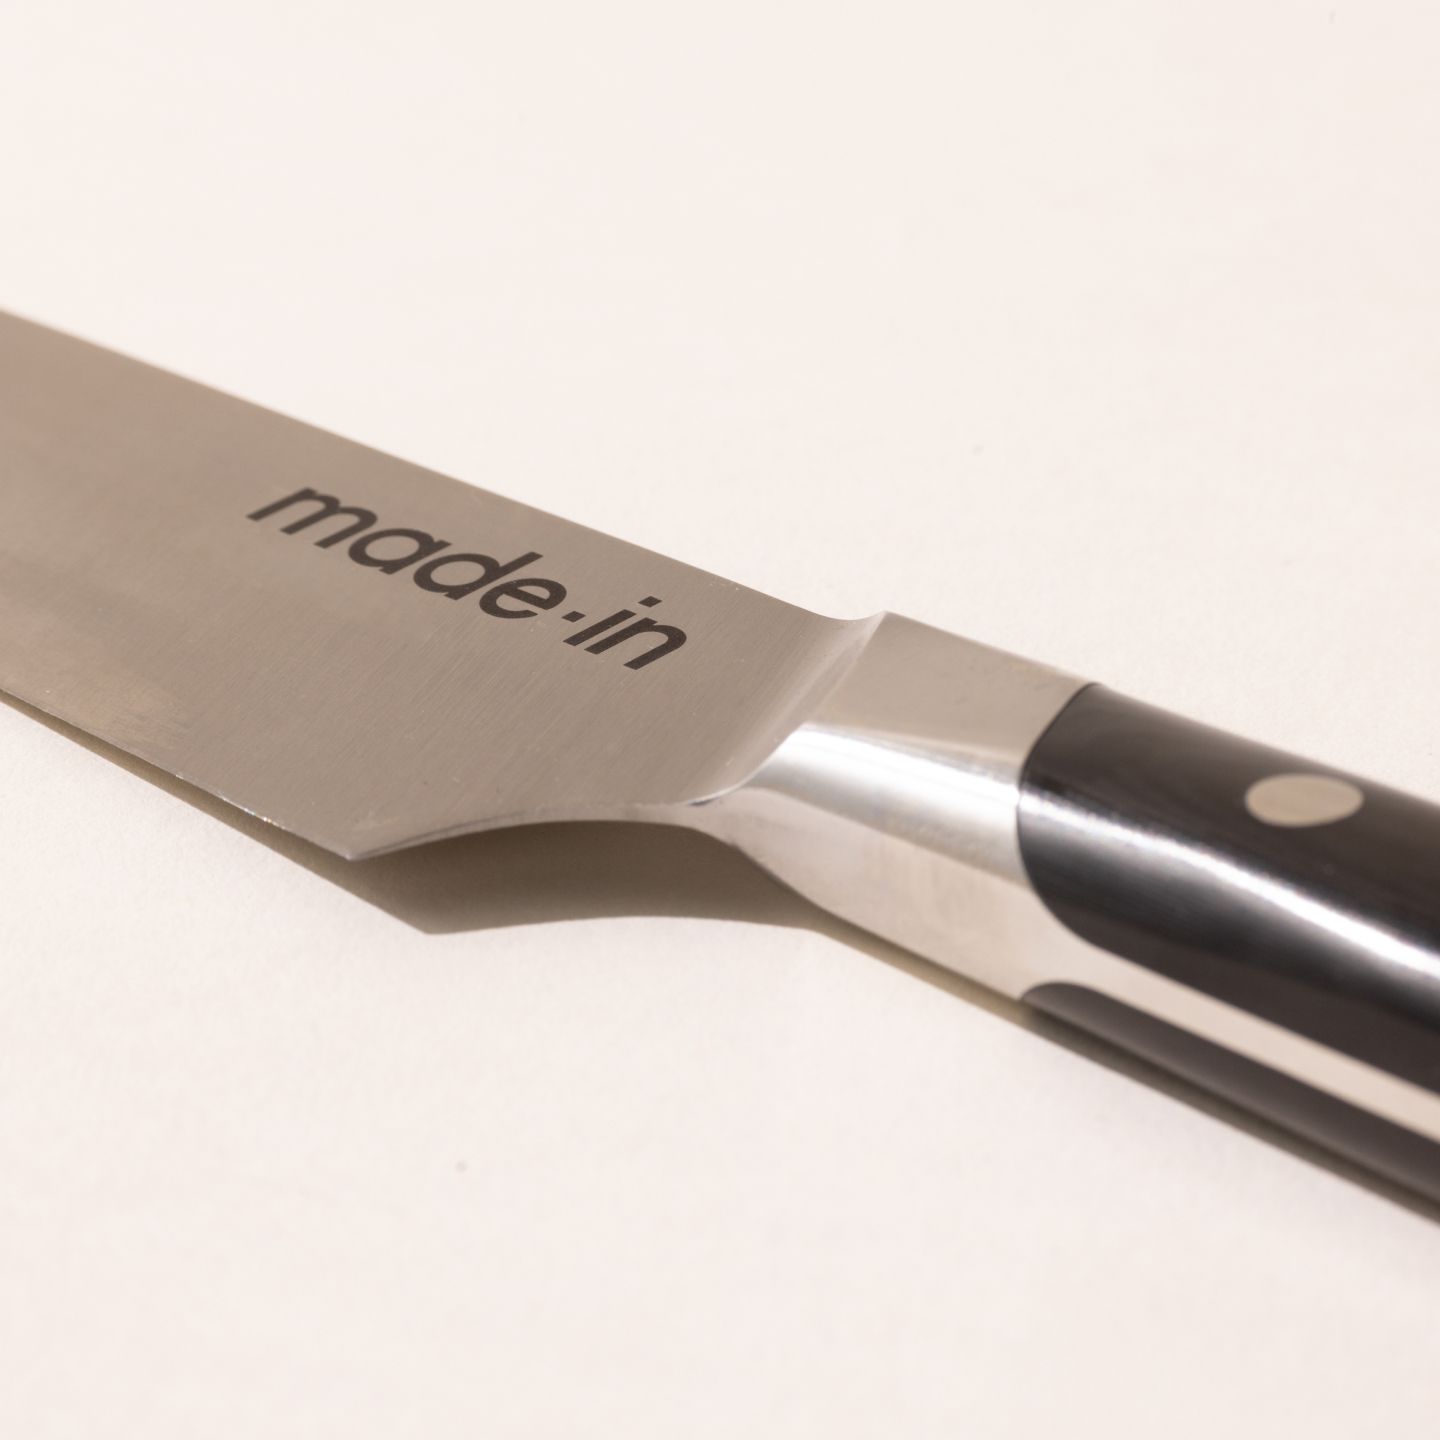 Made In Just Restocked Their Sold Out 6-Inch Chef's Knife